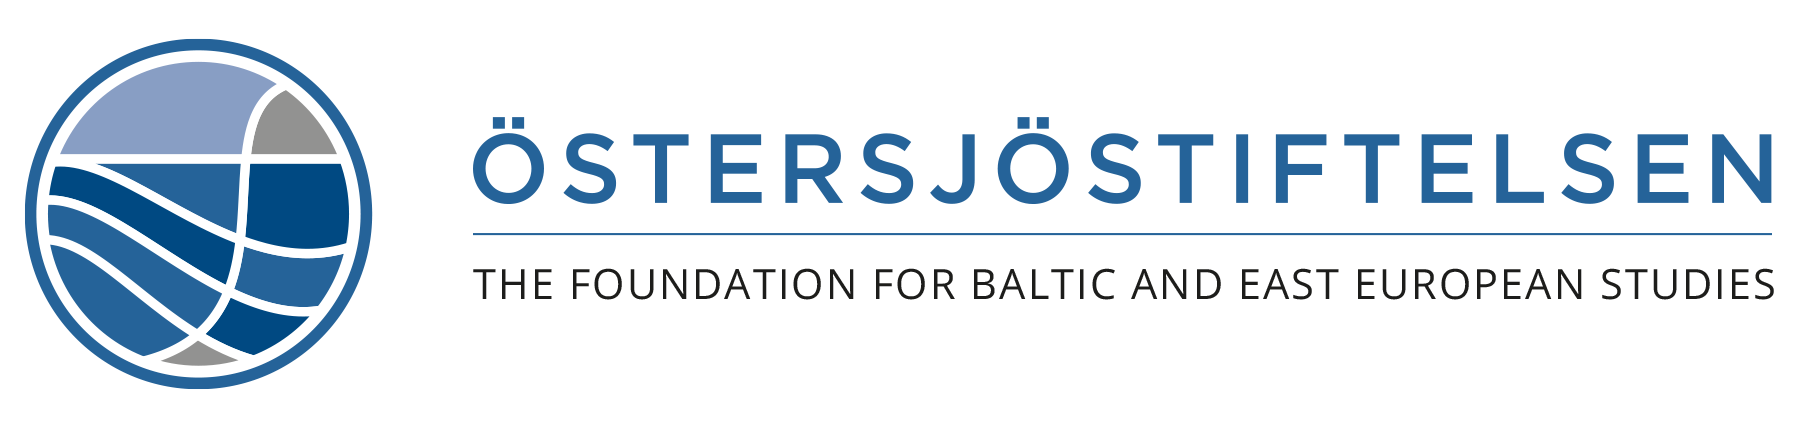 Read more about   The Foundation for Baltic and East European Studies